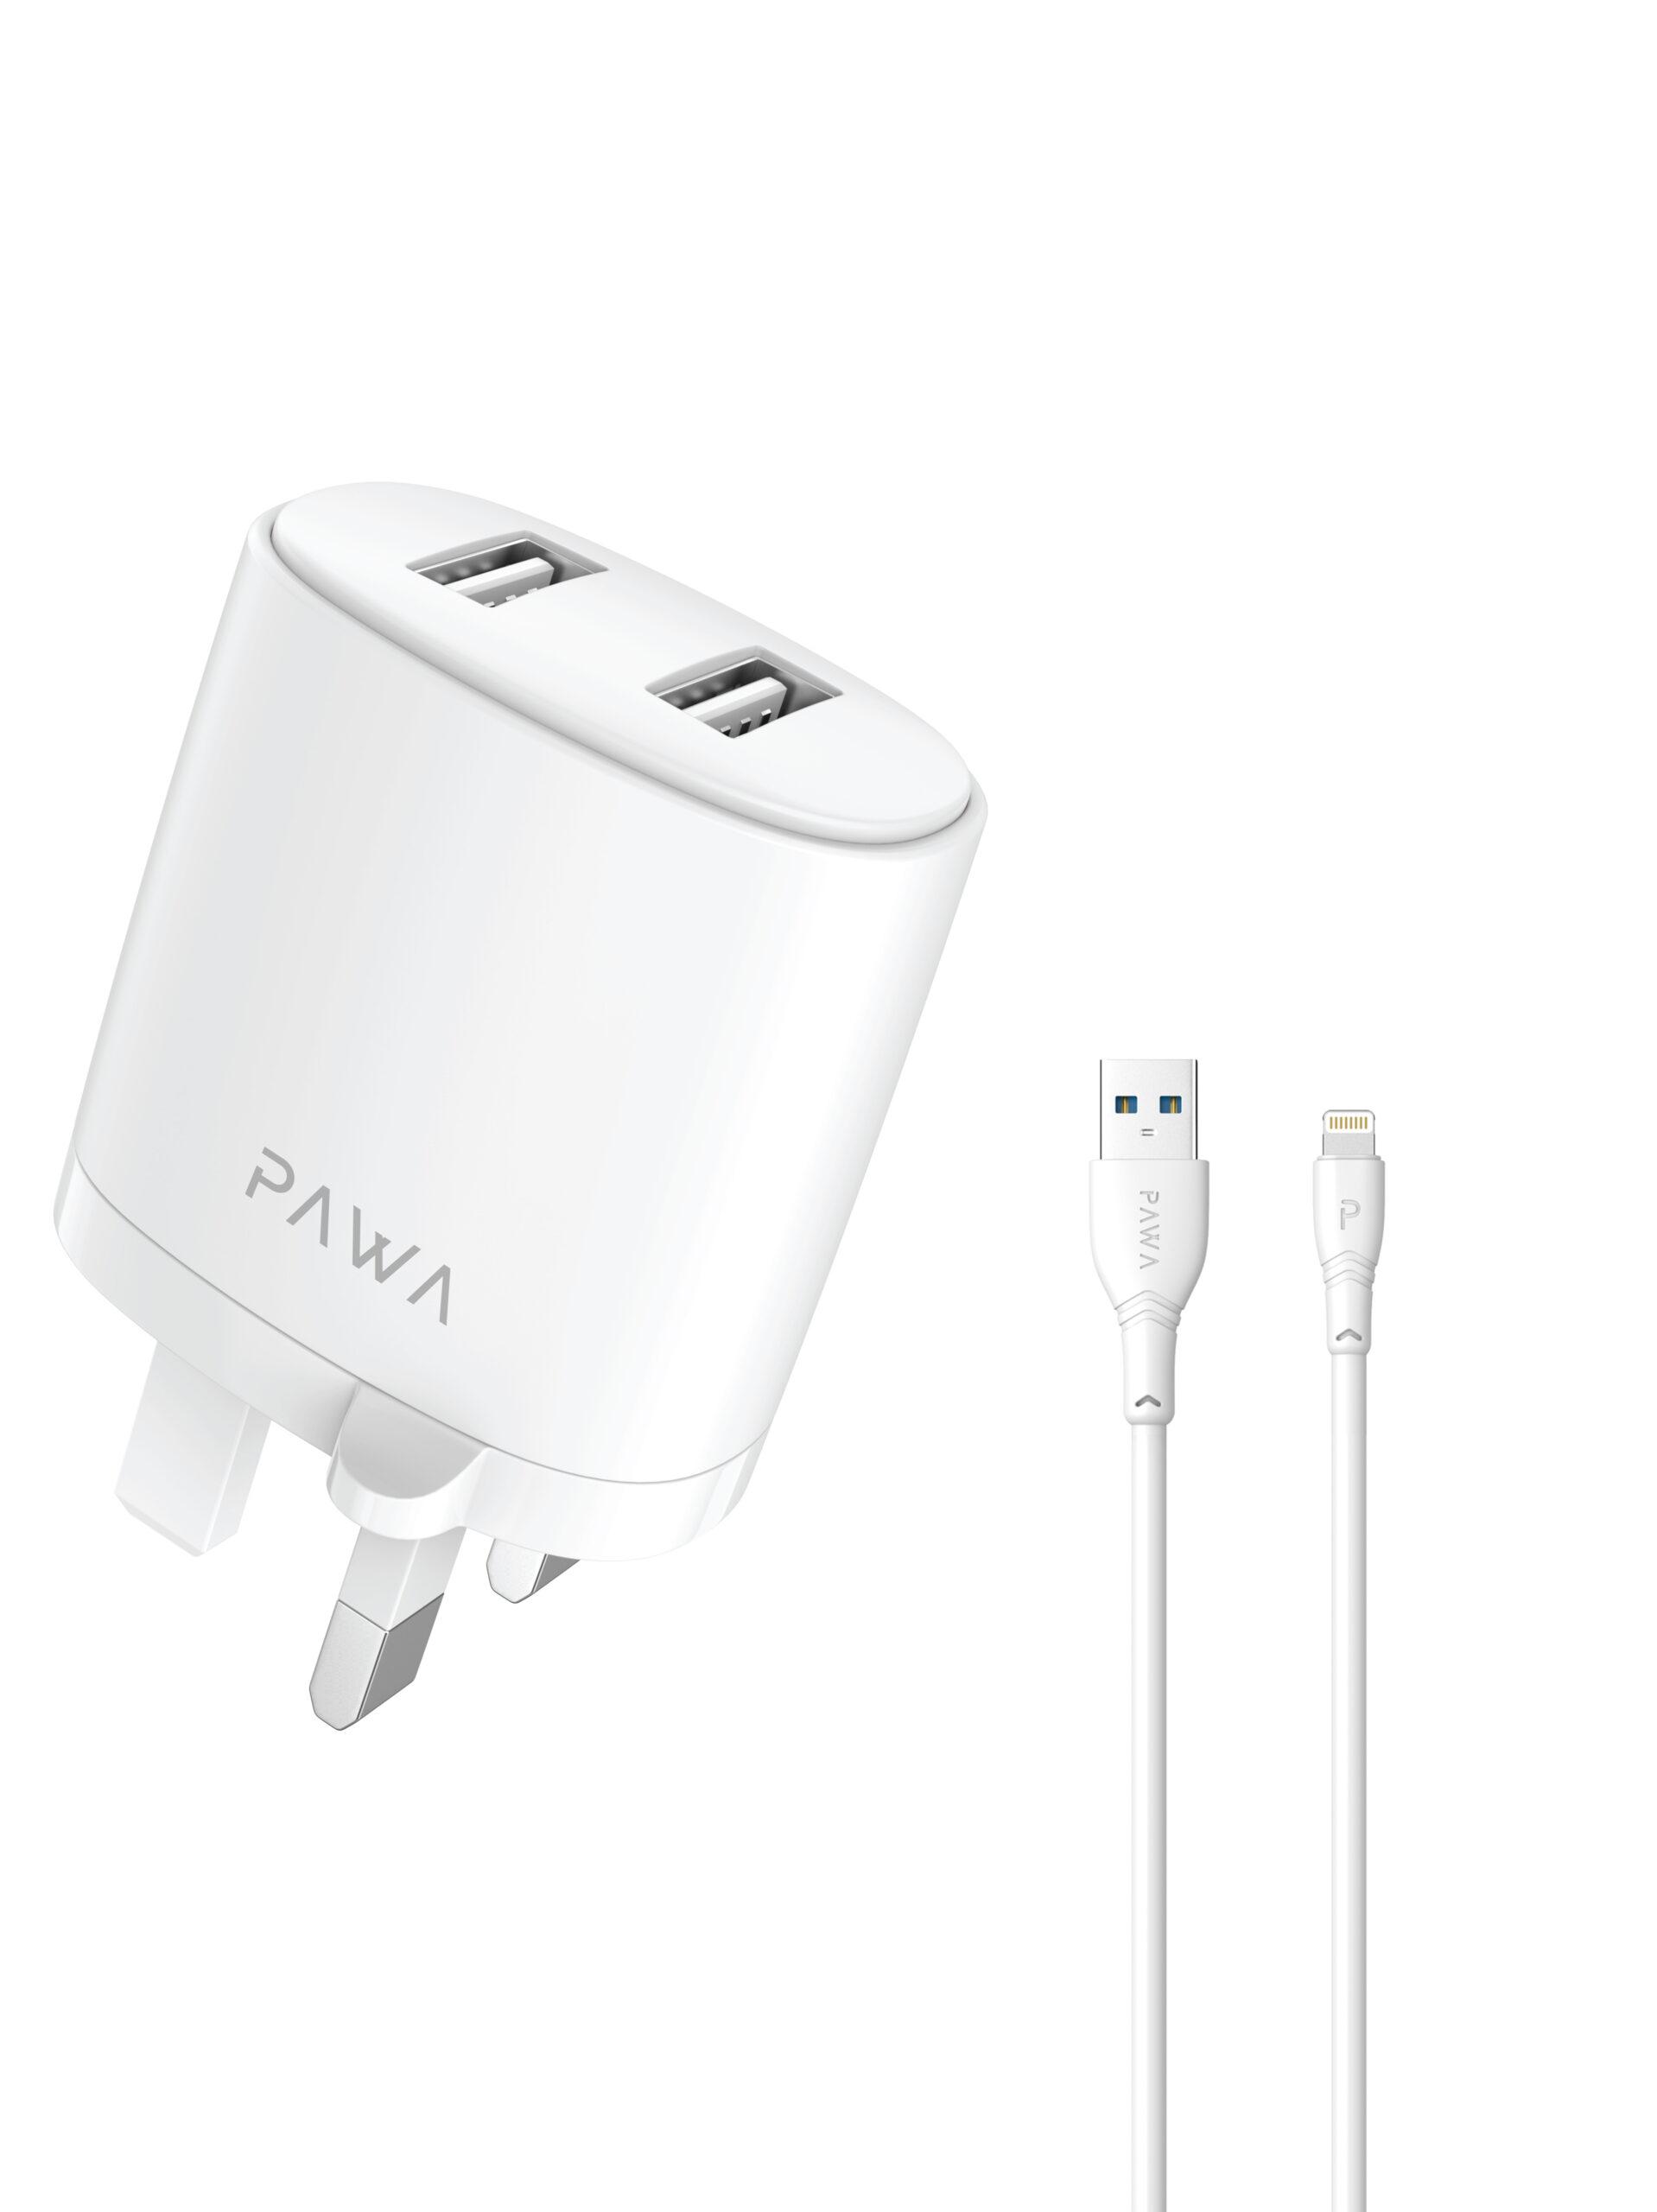 Pawa Dual USB Port Auto-ID Wall Charger 2.4A UK with Lightning Cable - White